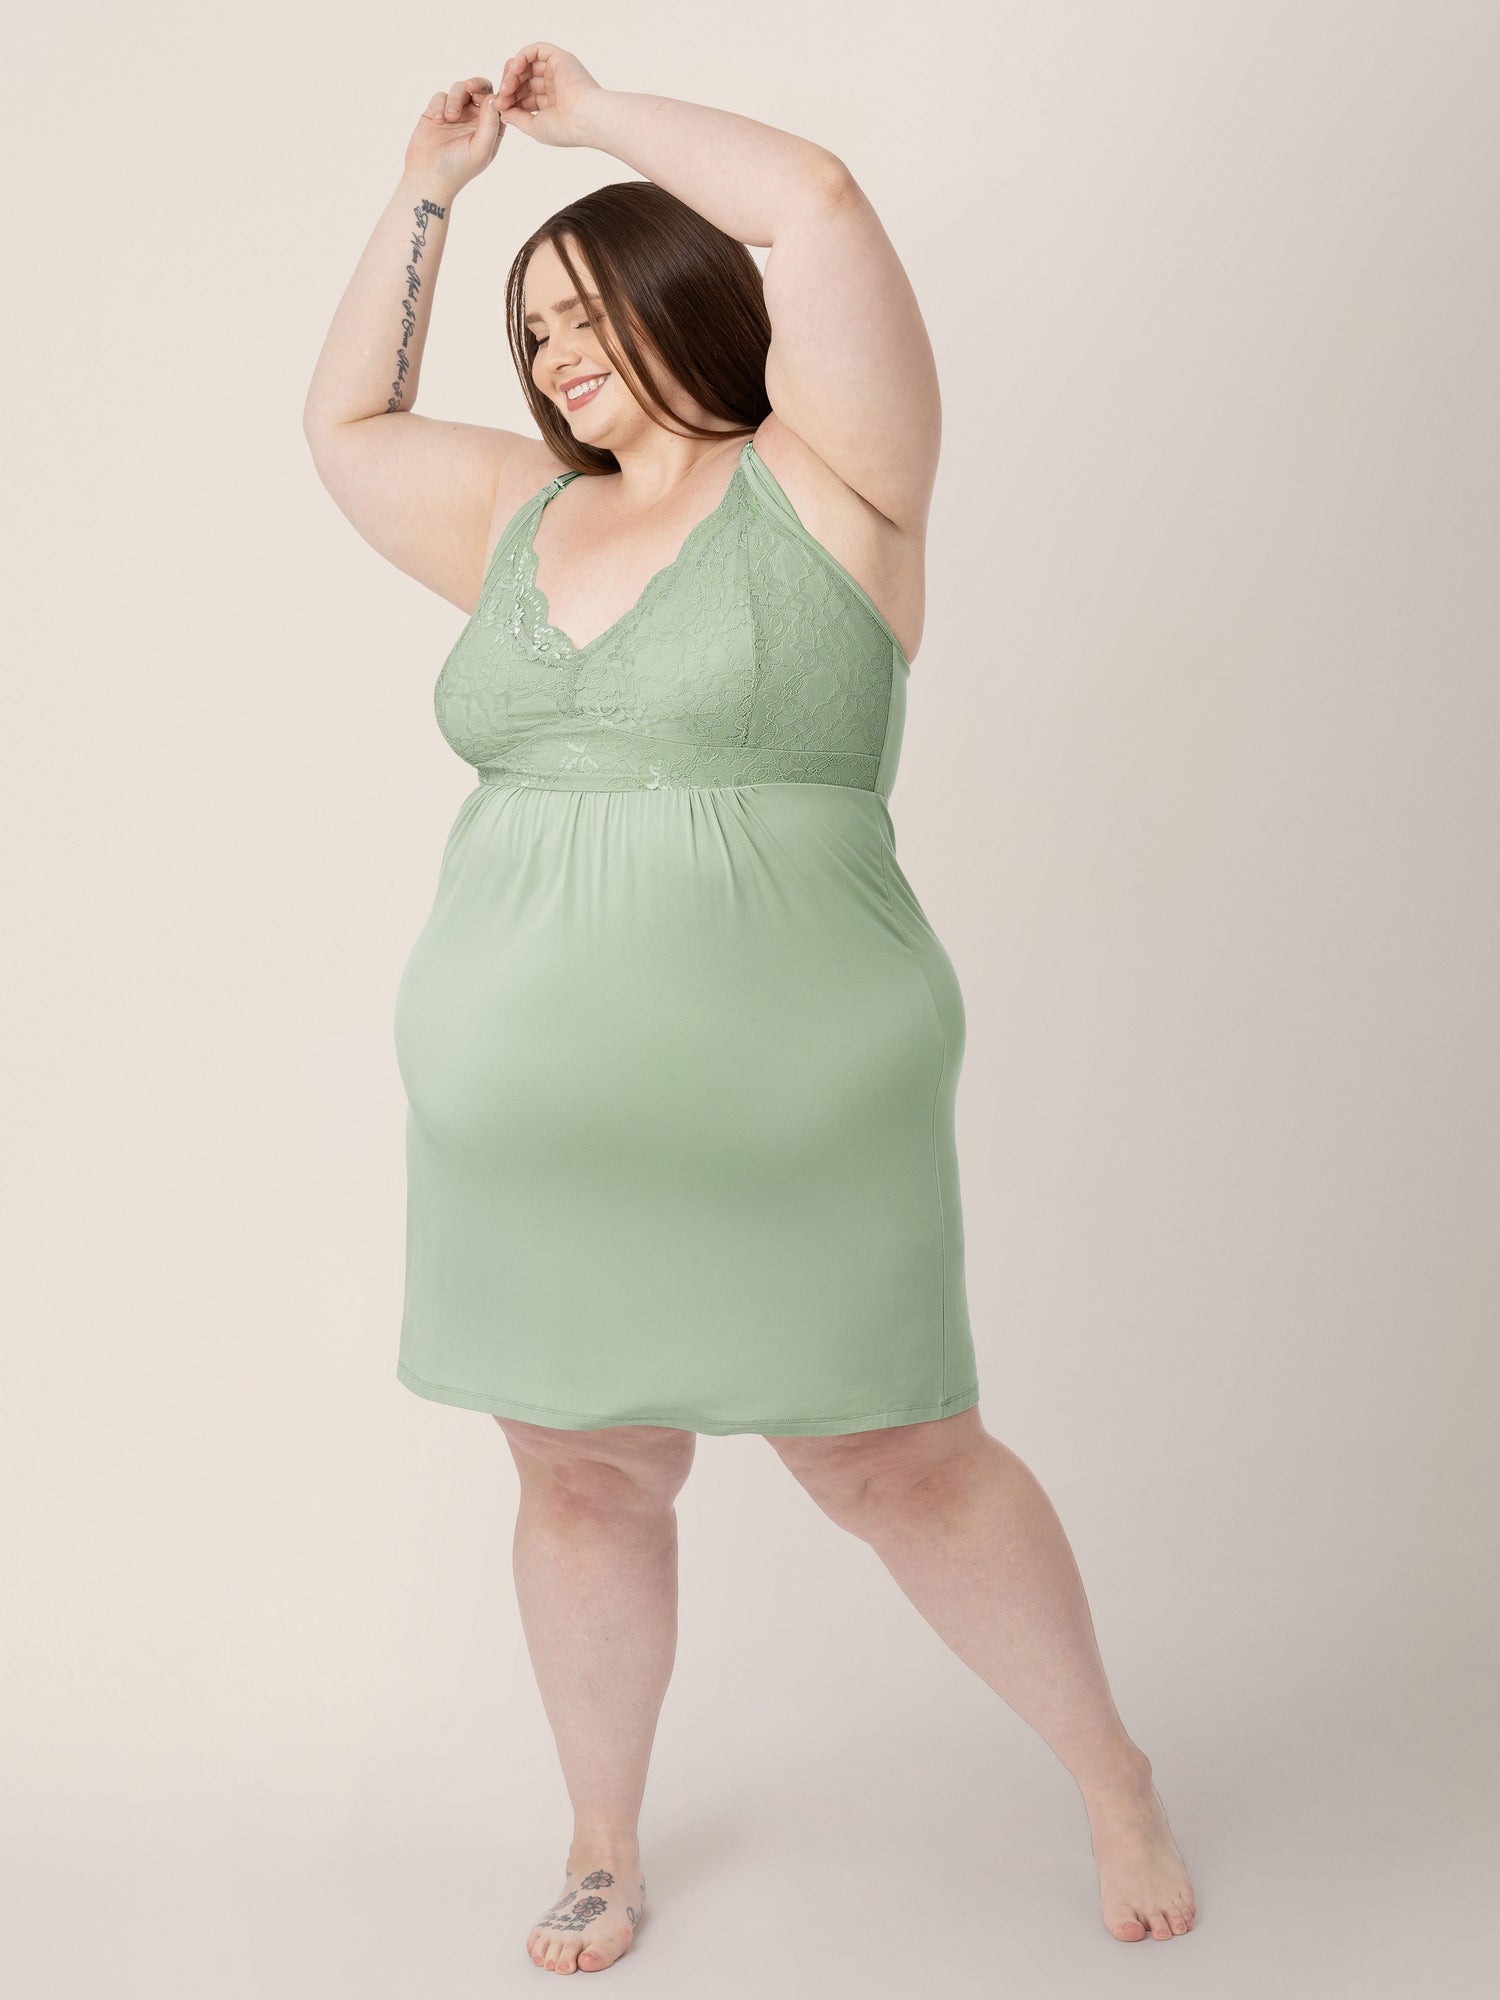 Model with her hands above her head wearing the Lucille Maternity & Nursing Nightgown in Pistachio.